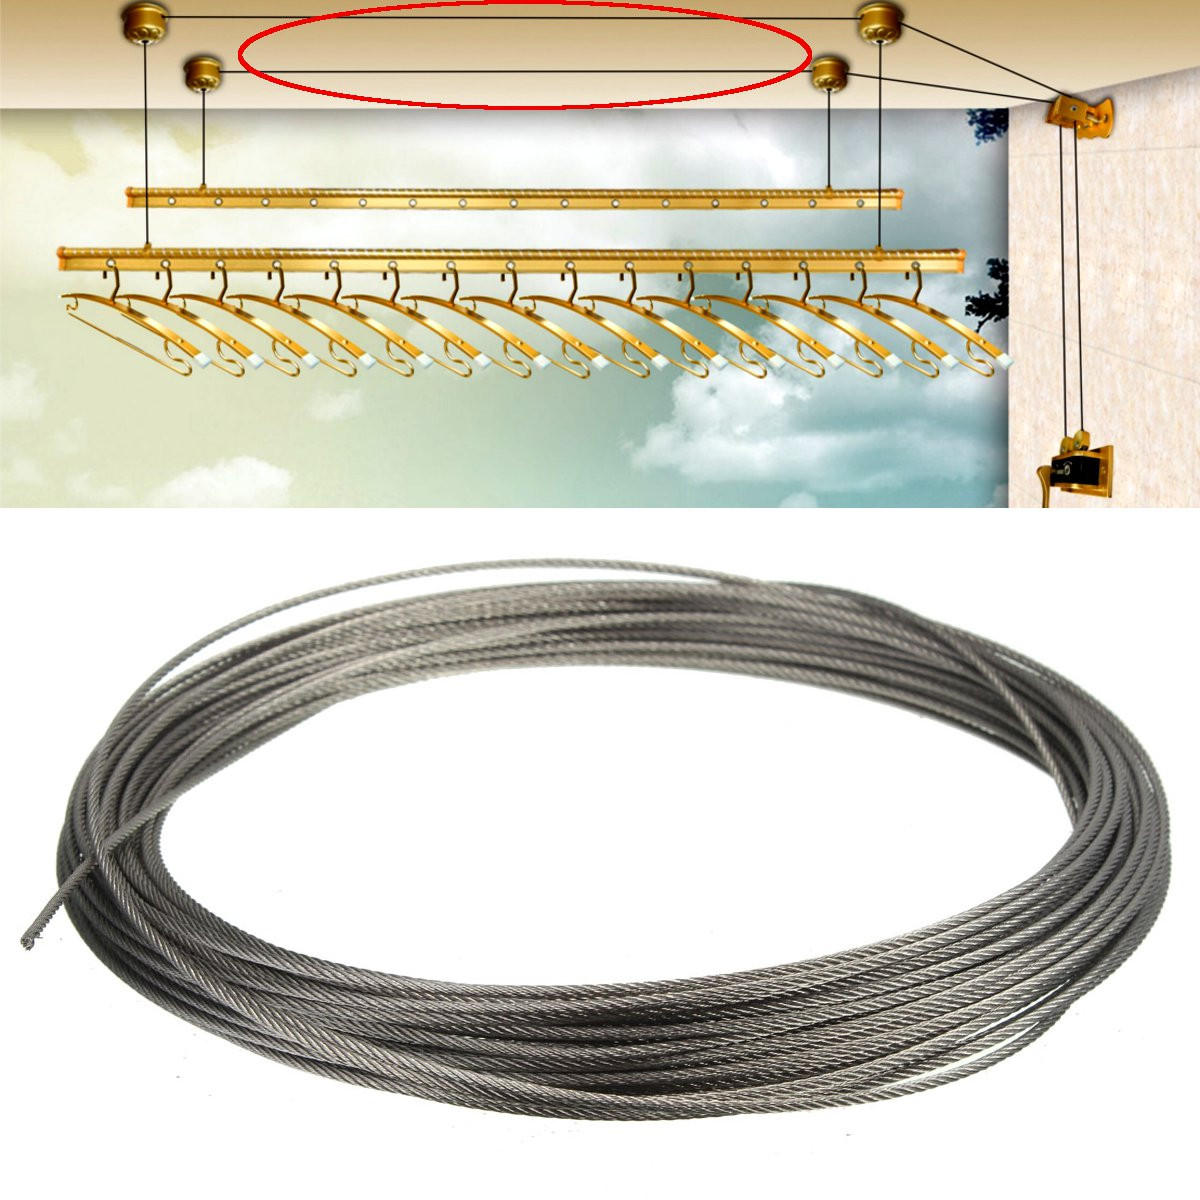 15M 316 Stainless Steel Clothes Cable Line Wire Rope